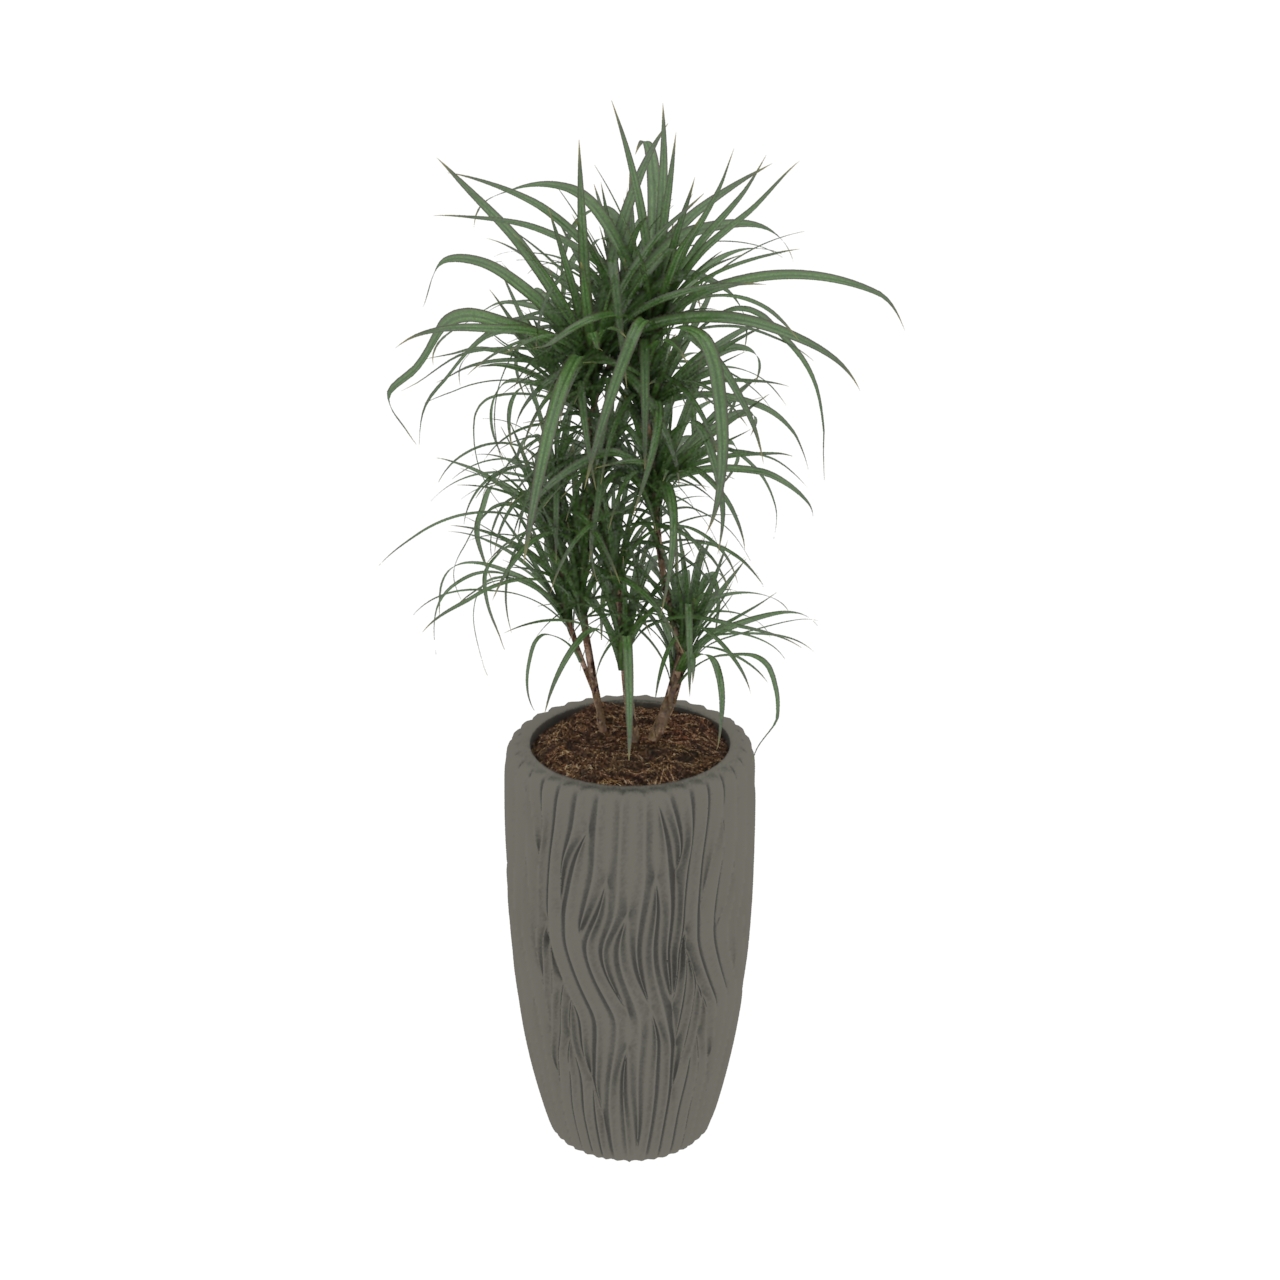 greenery plants potted 3d model